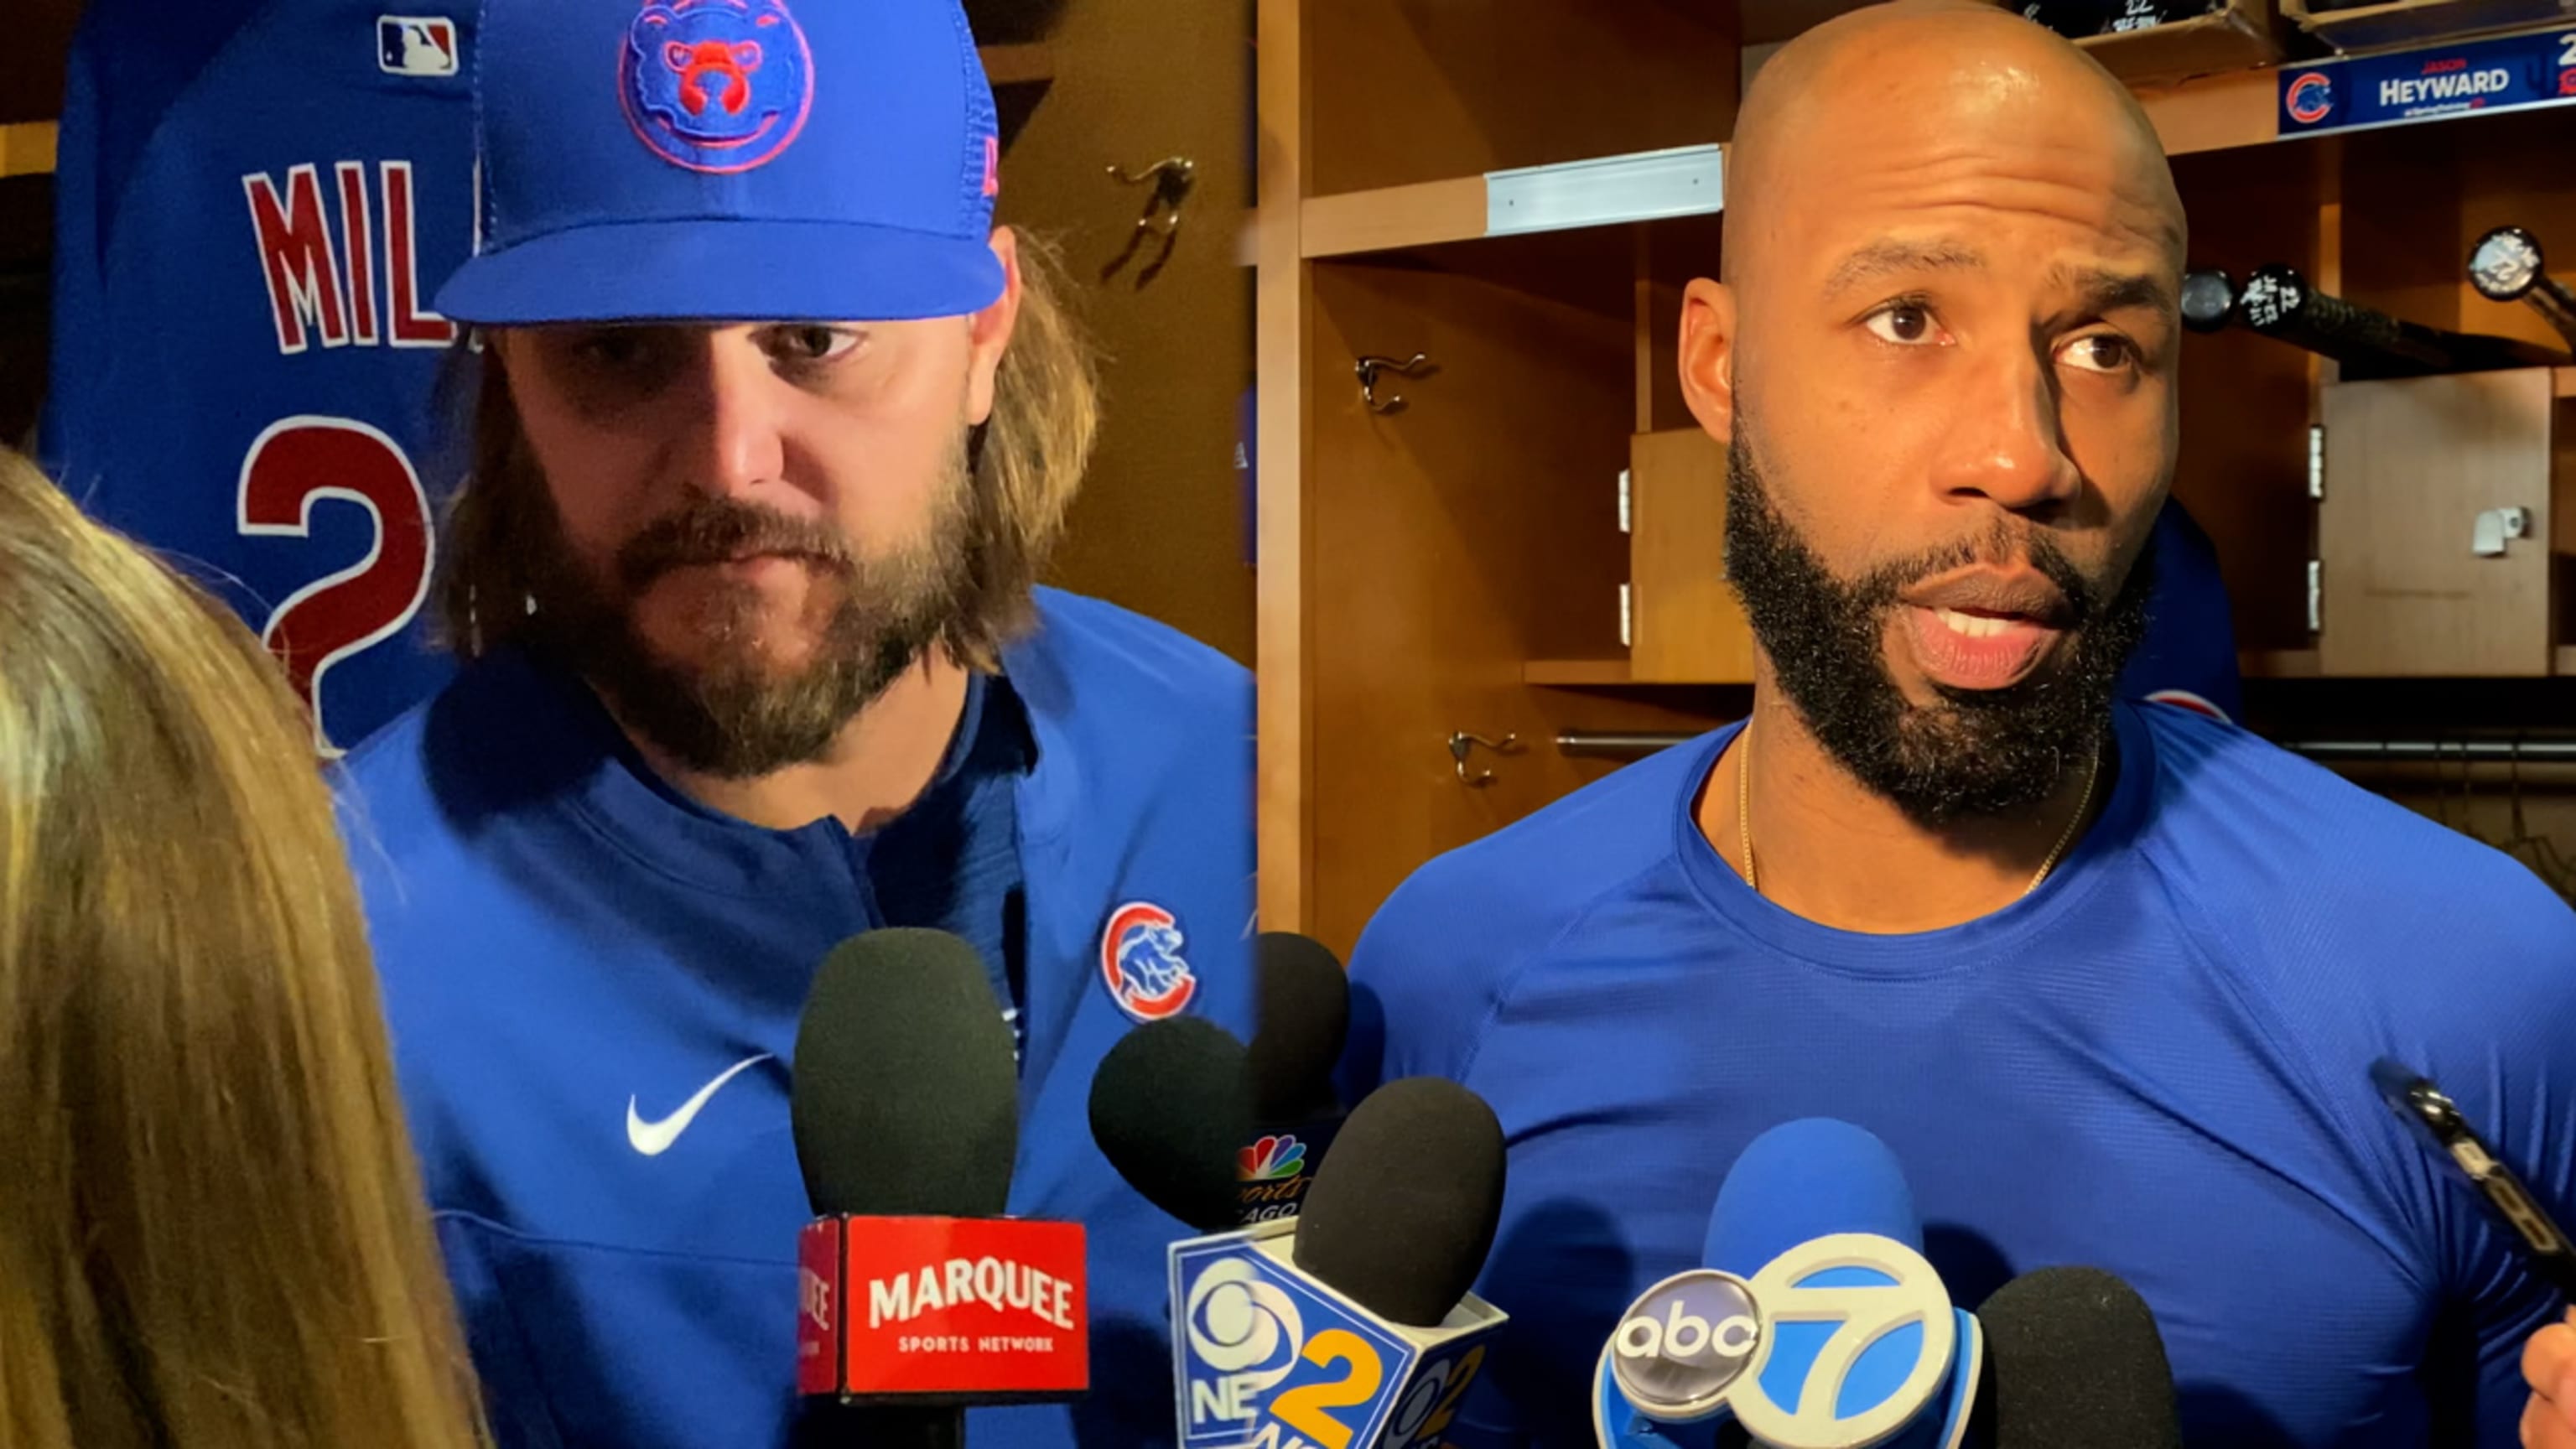 Jason Heyward works to change Chicago for the better National News - Bally  Sports